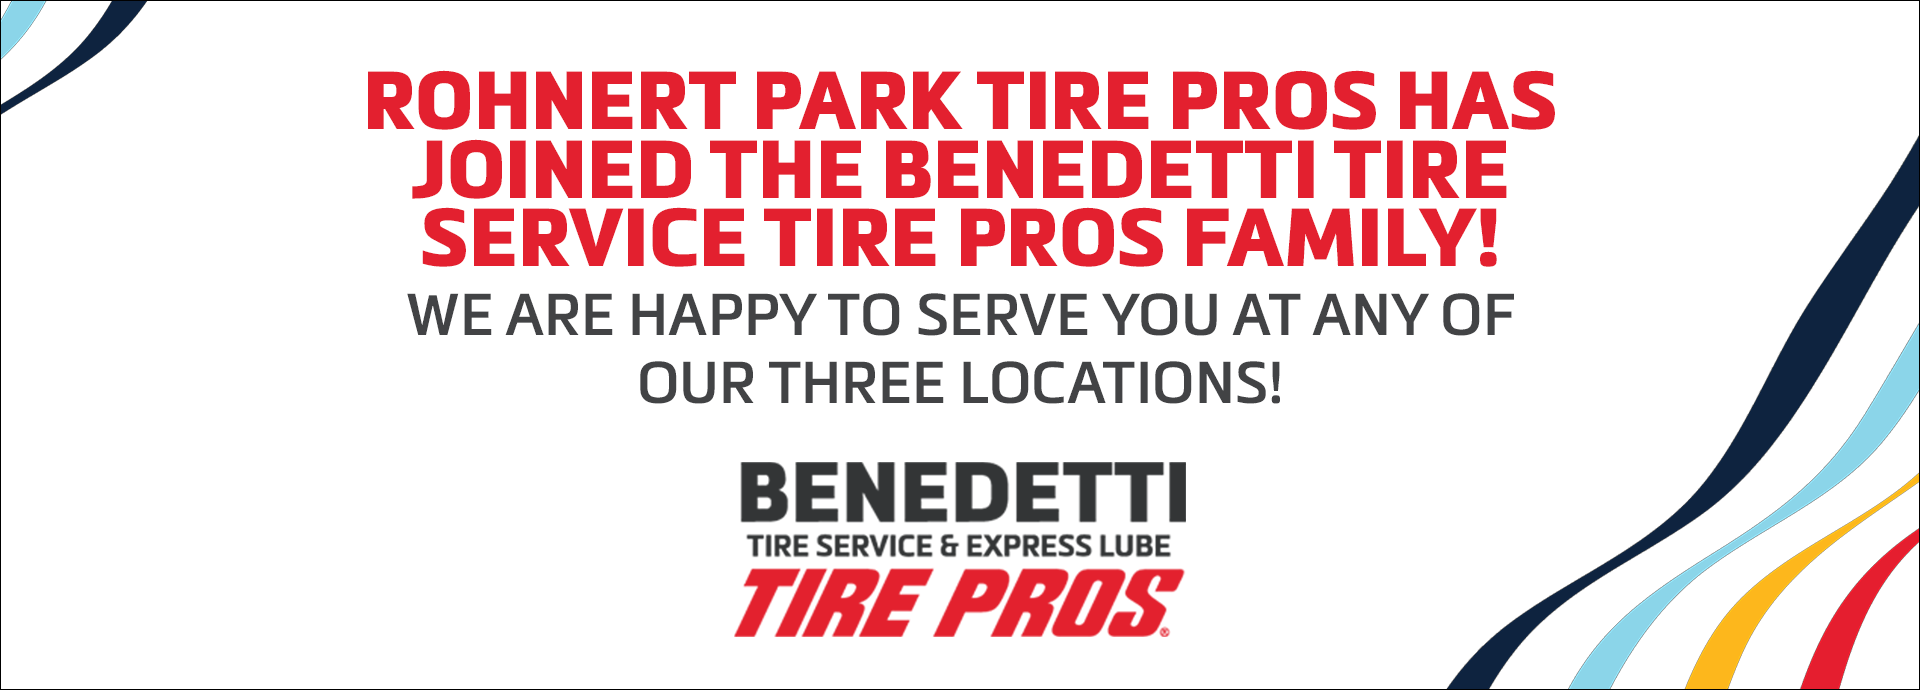 Joined Benedetti Tire Family